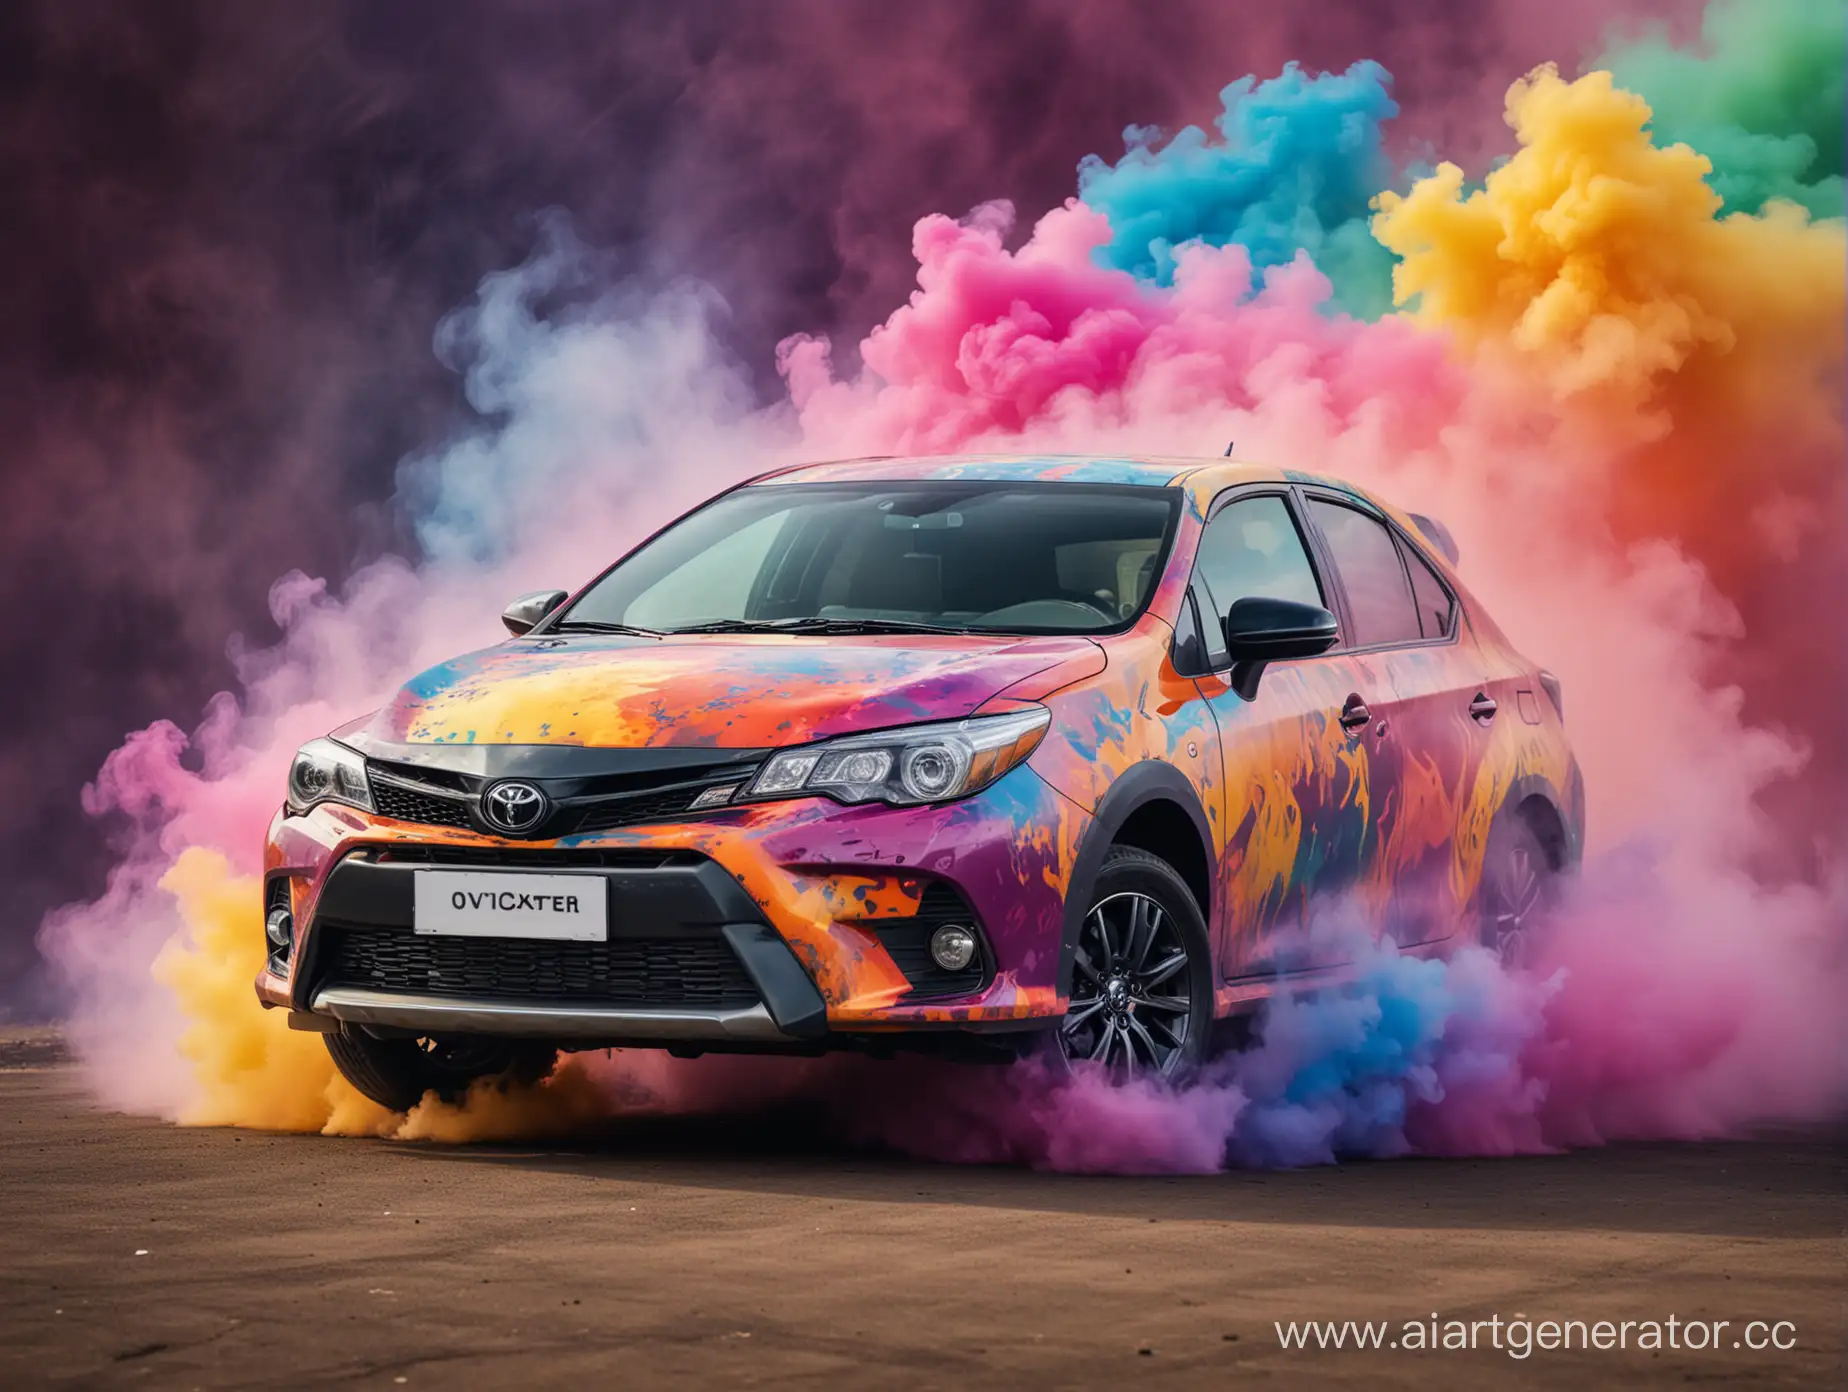 Toyota-Car-Stands-Out-in-Vibrant-Smoke-Display